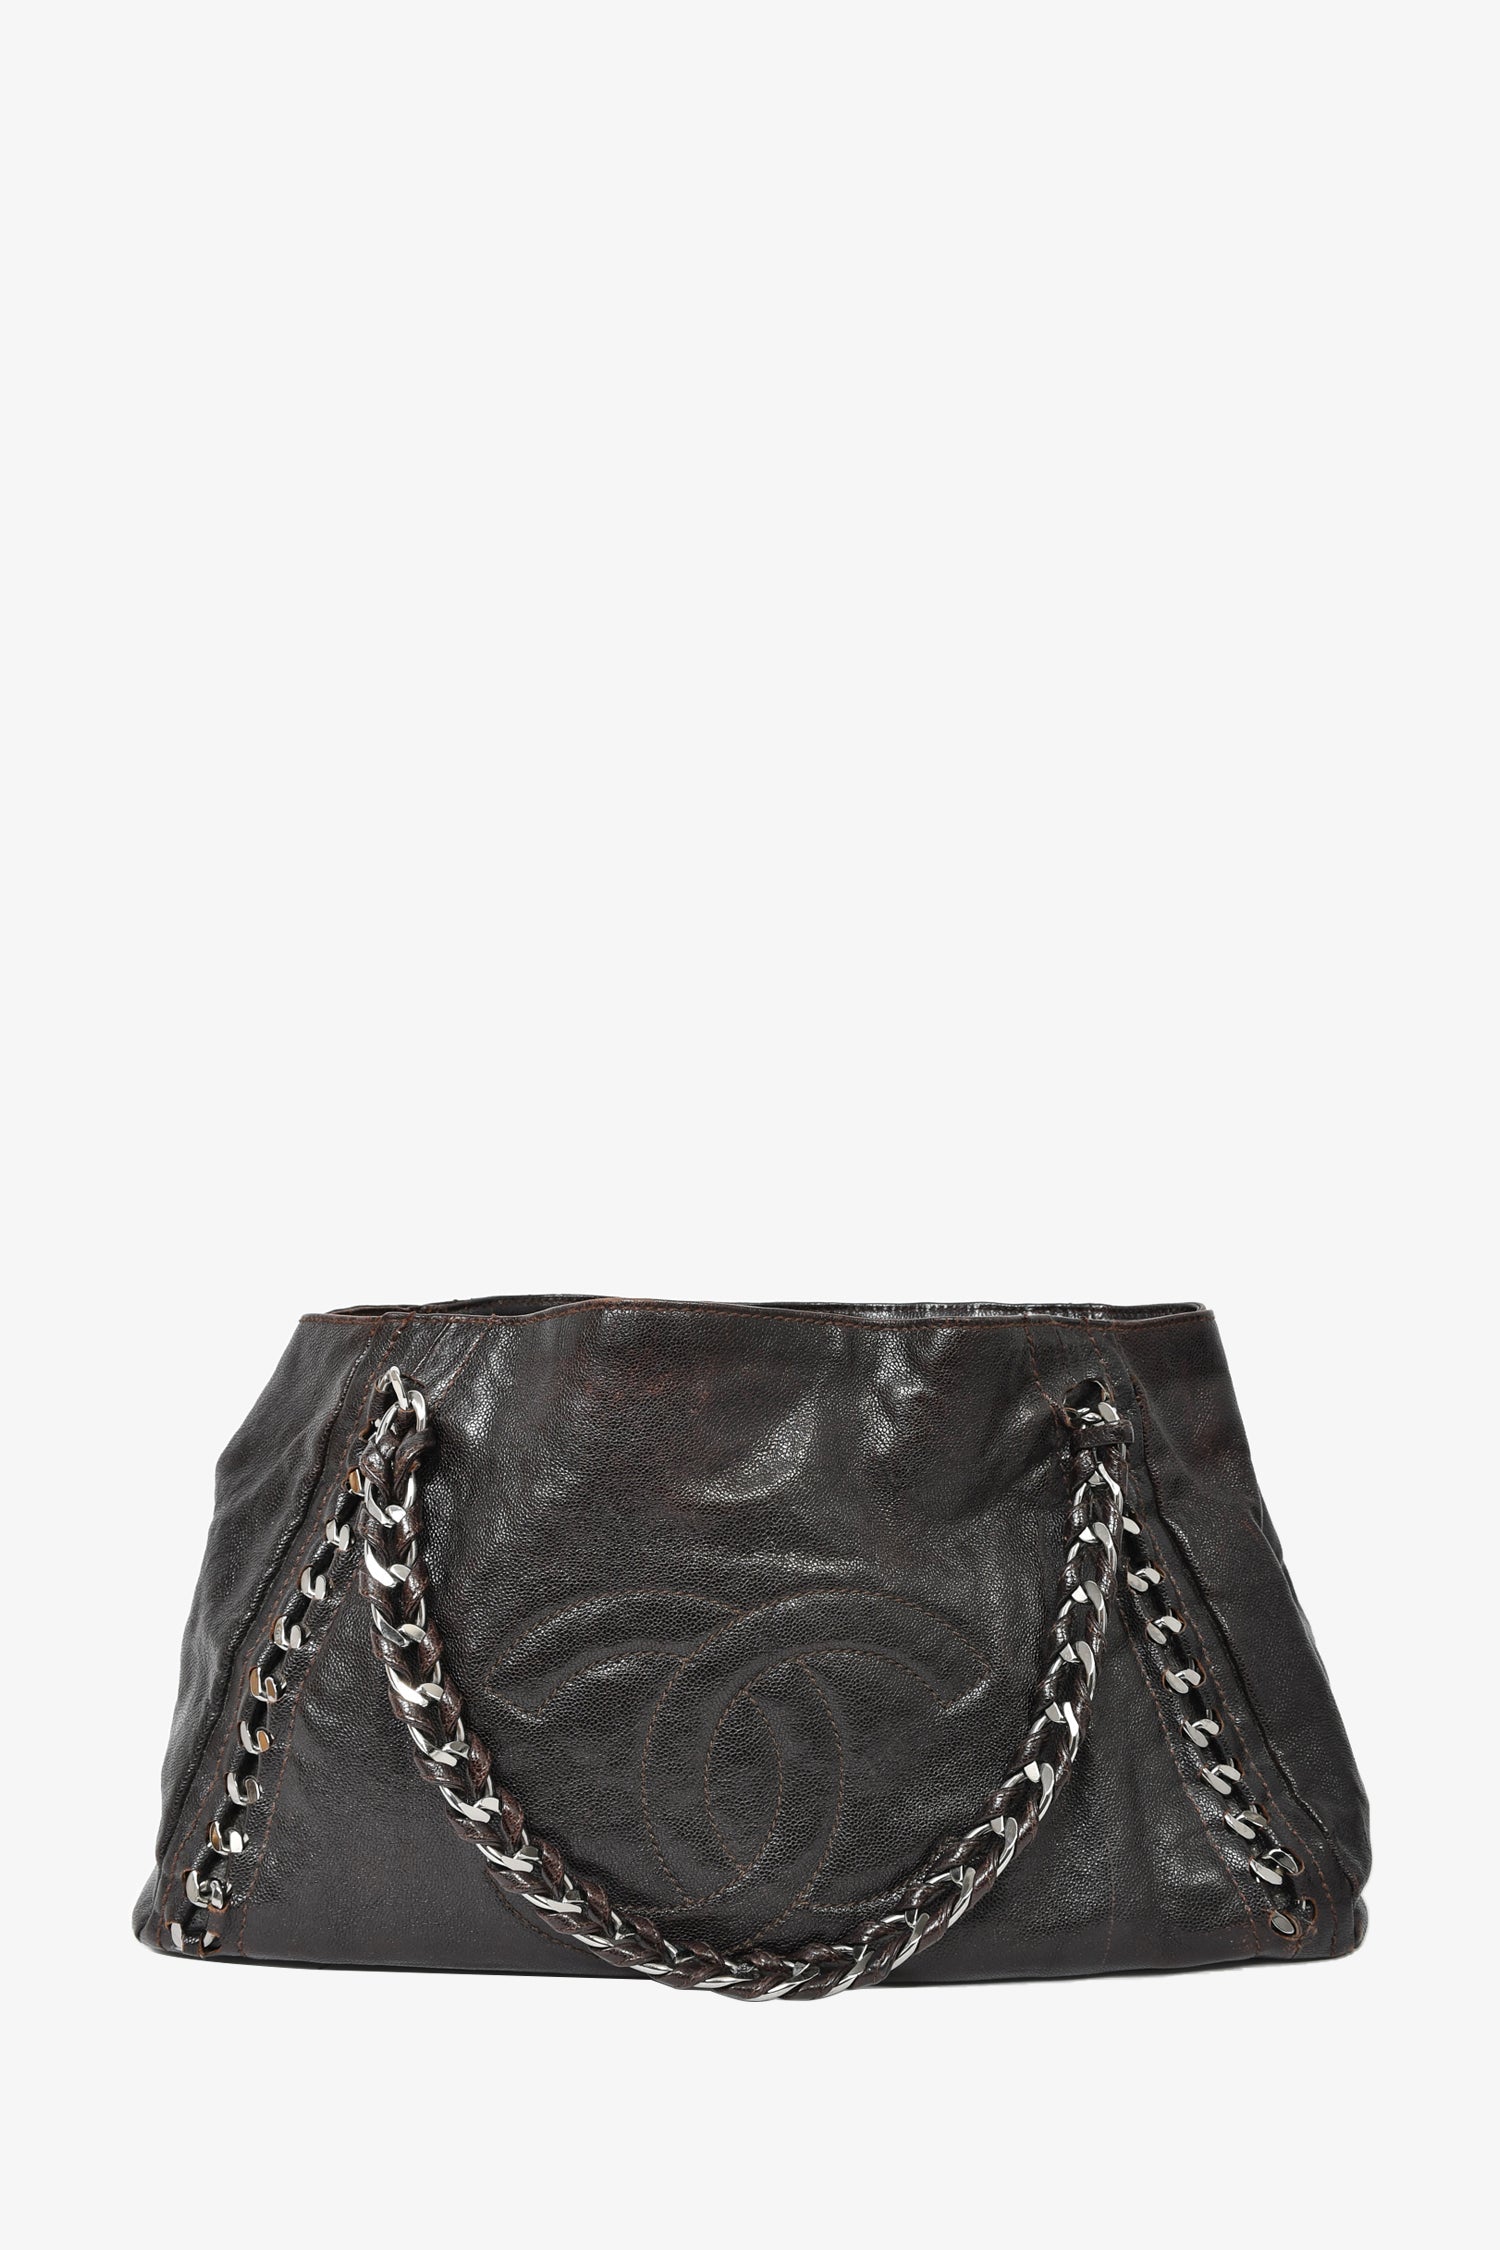 Chanel Dark Brown Caviar Leather Modern Chain East/West Tote